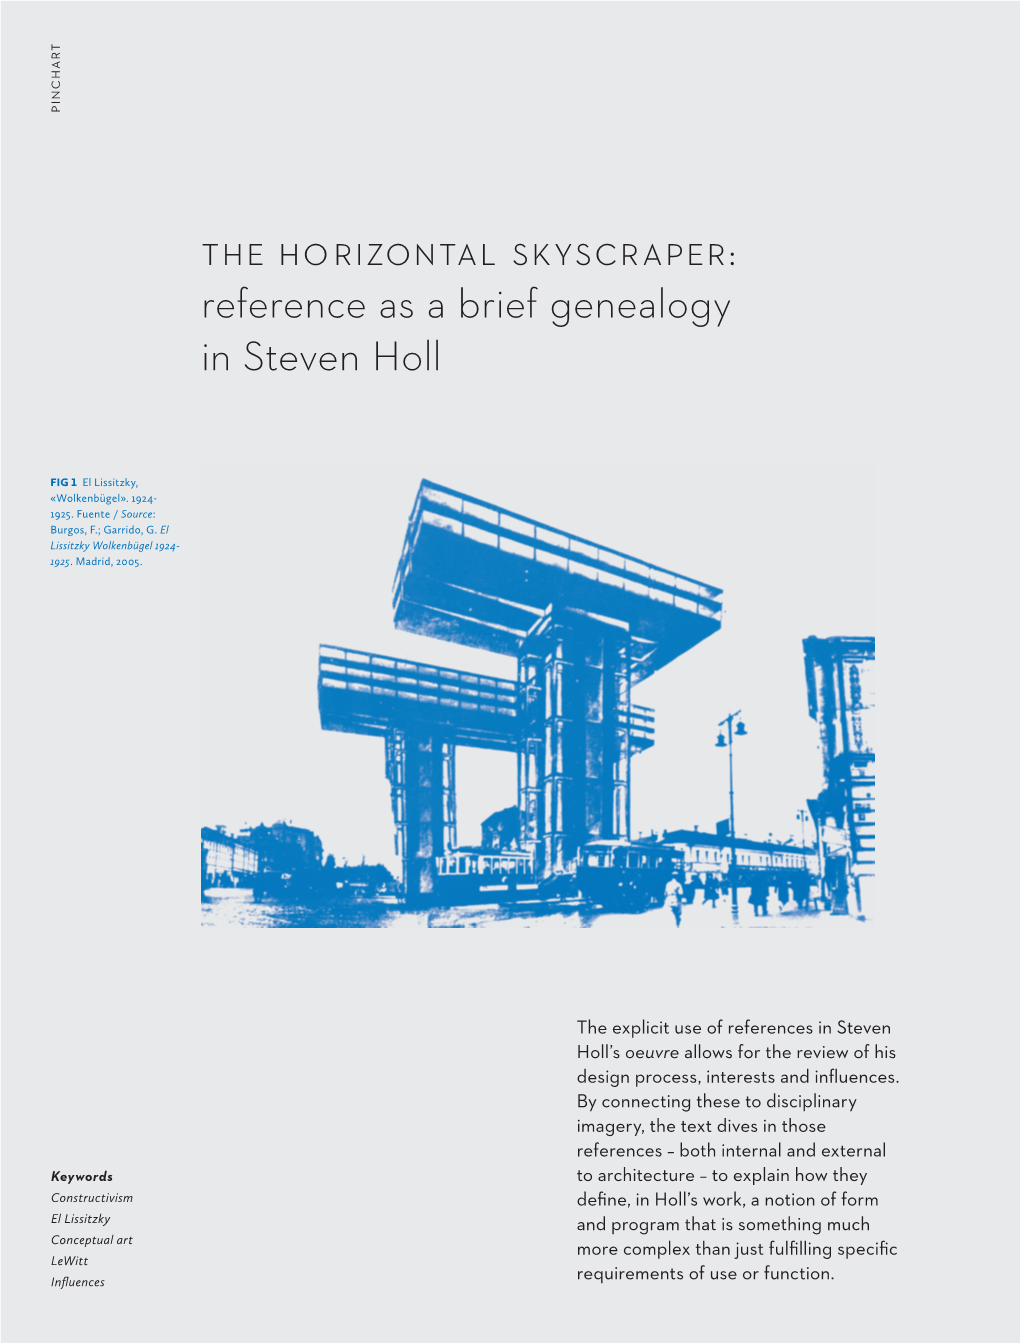 Reference As a Brief Genealogy in Steven Holl